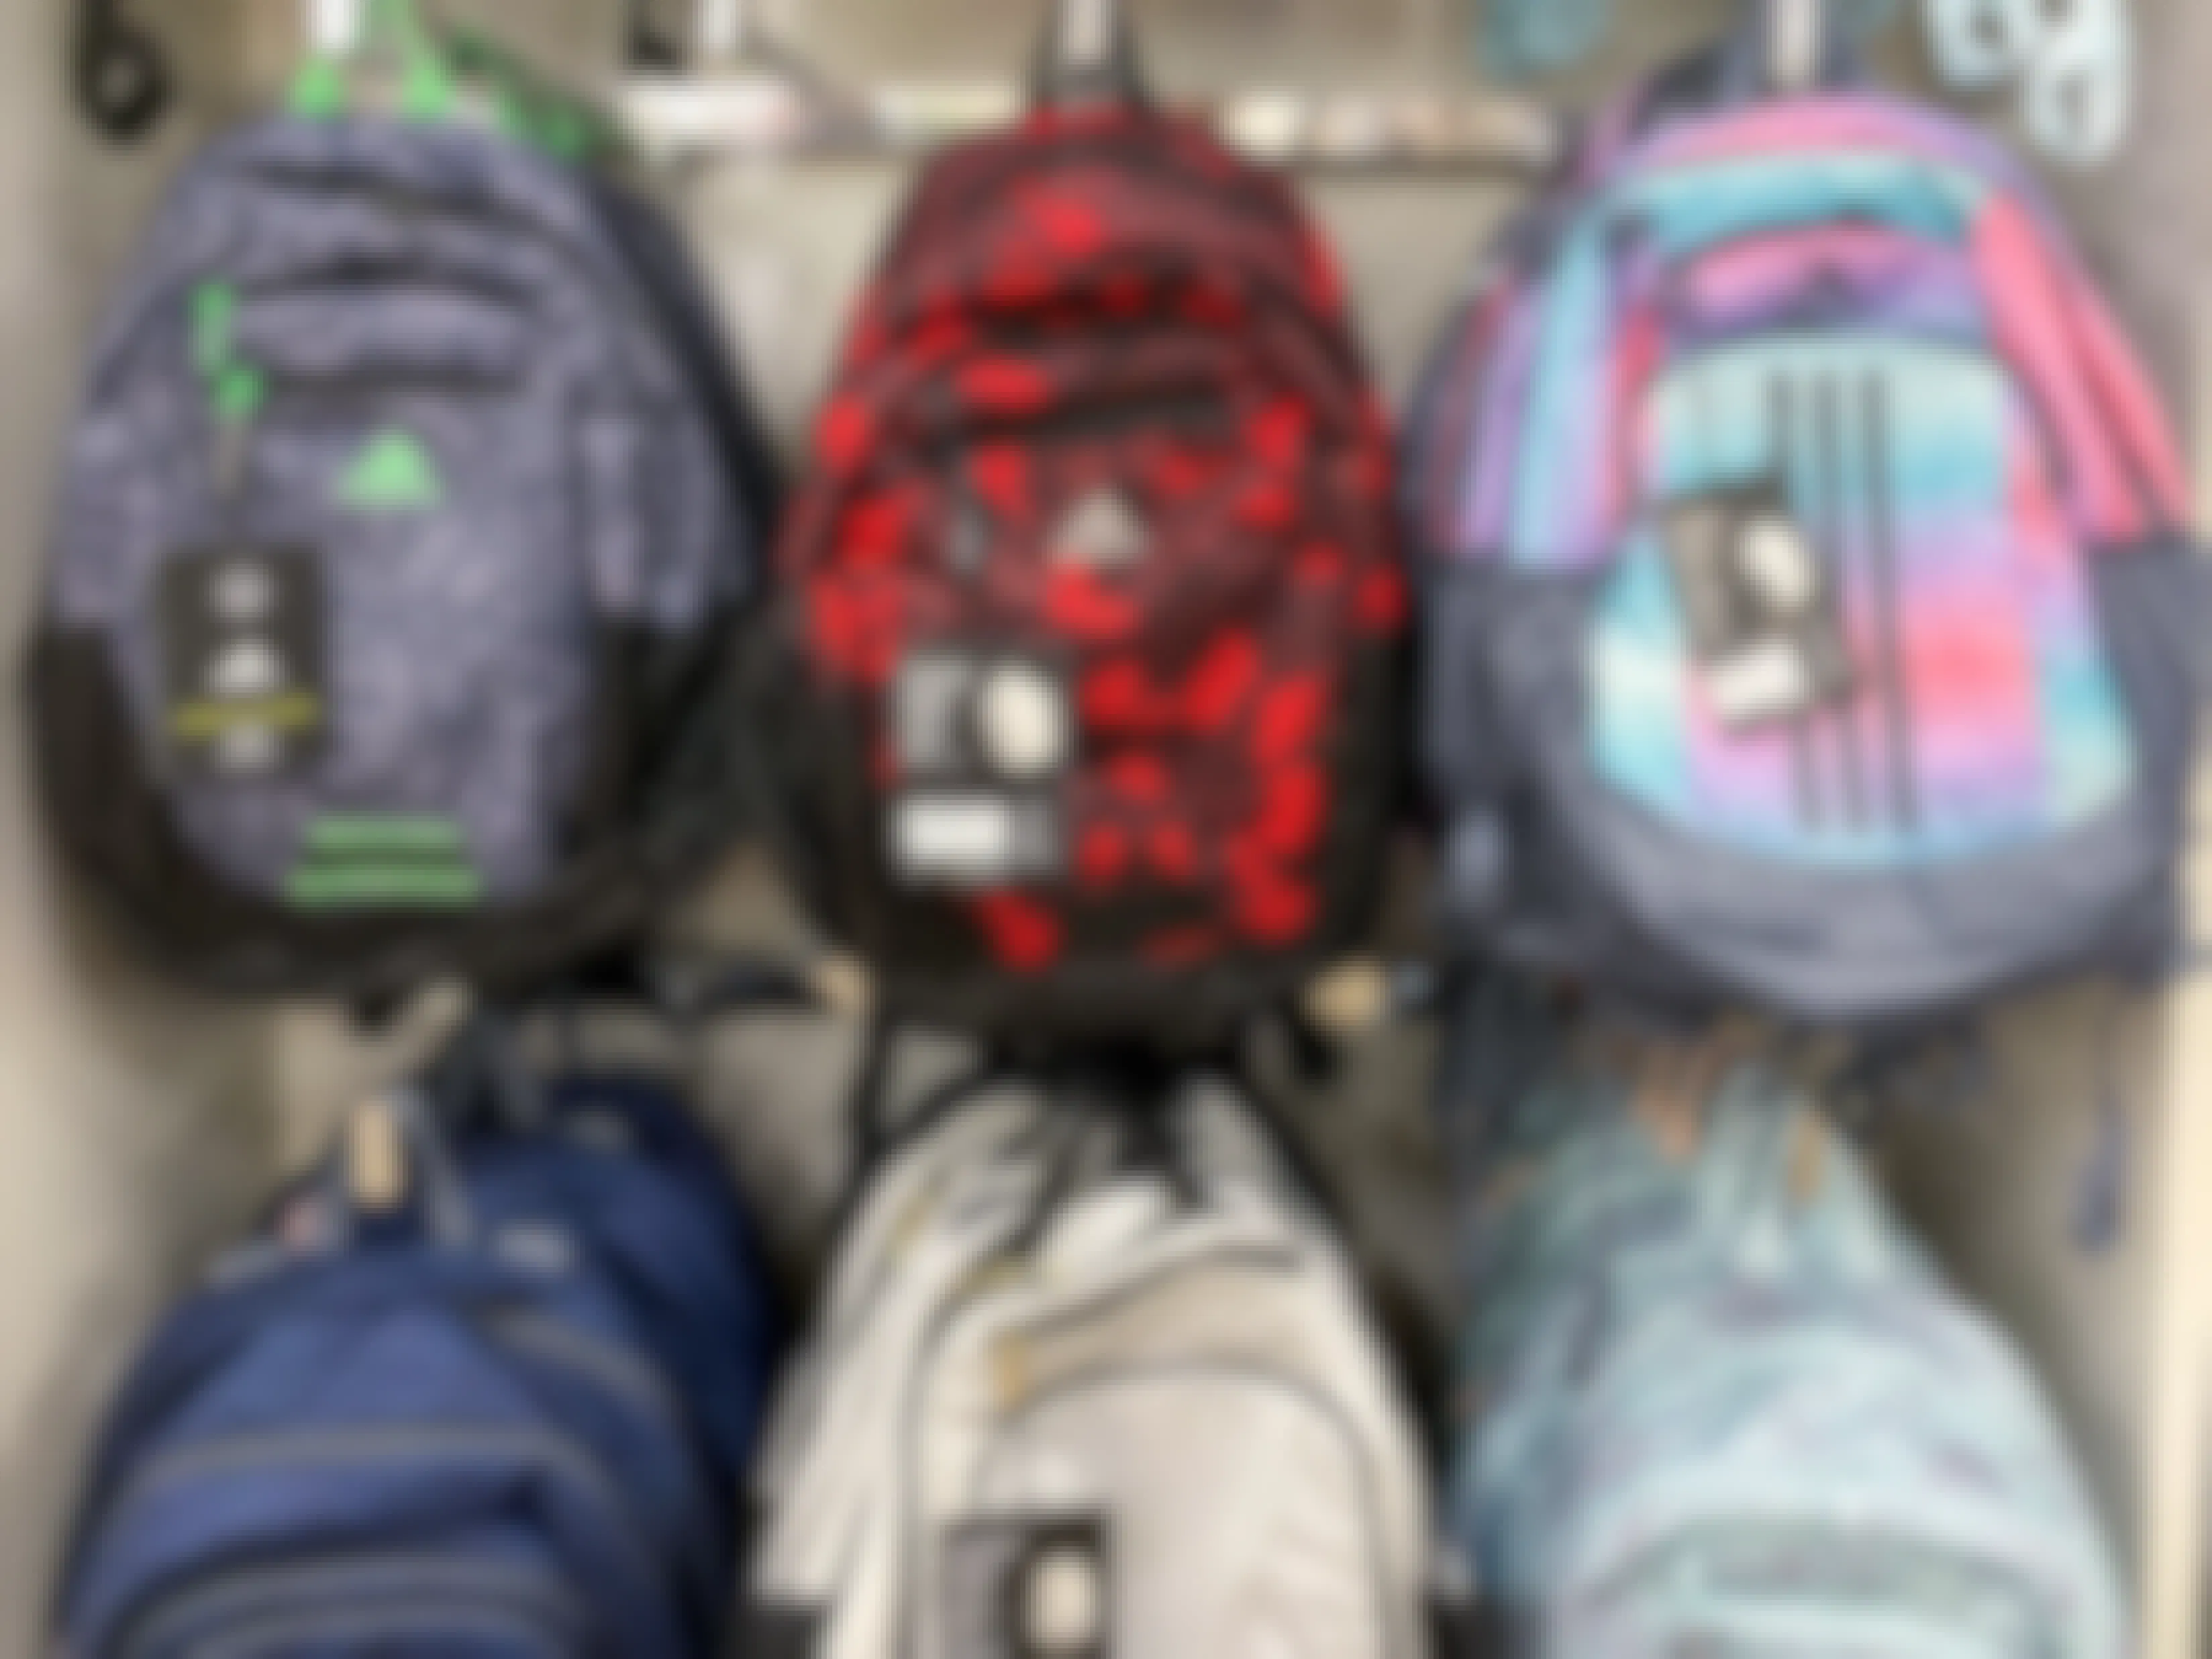 How to Get a Free Backpack Filled With School Supplies! We've Got the Deets